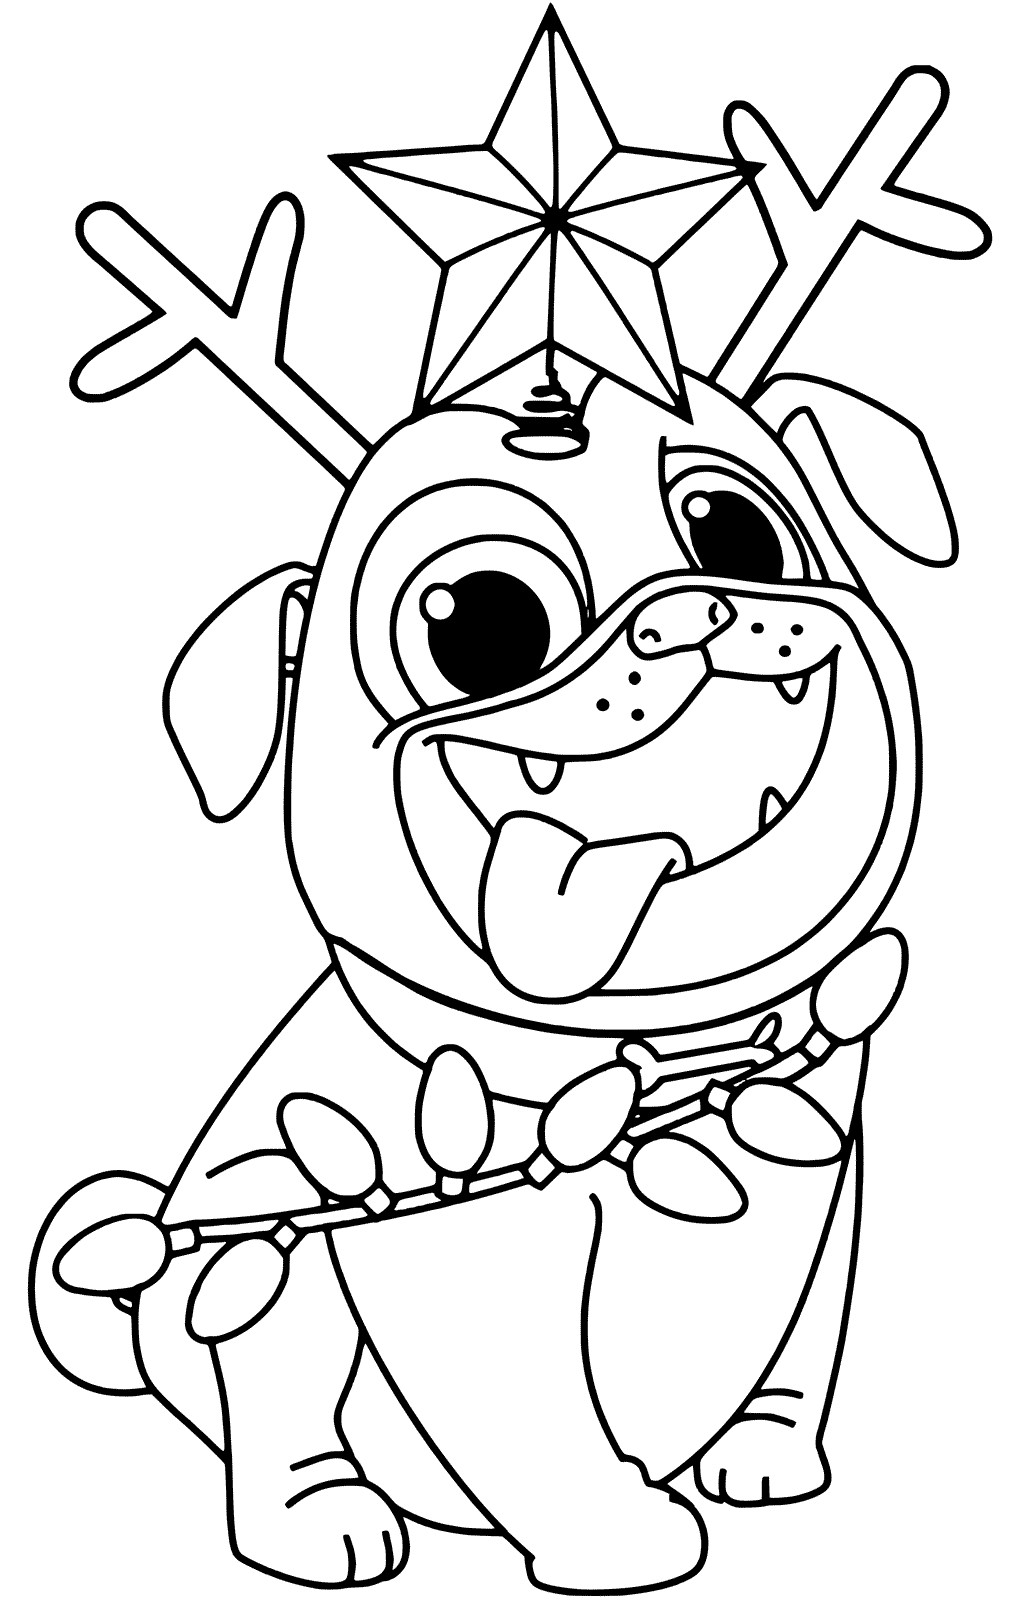 Free Printable Puppy Coloring Pages
 Puppy Dog Pals Coloring Pages To Print